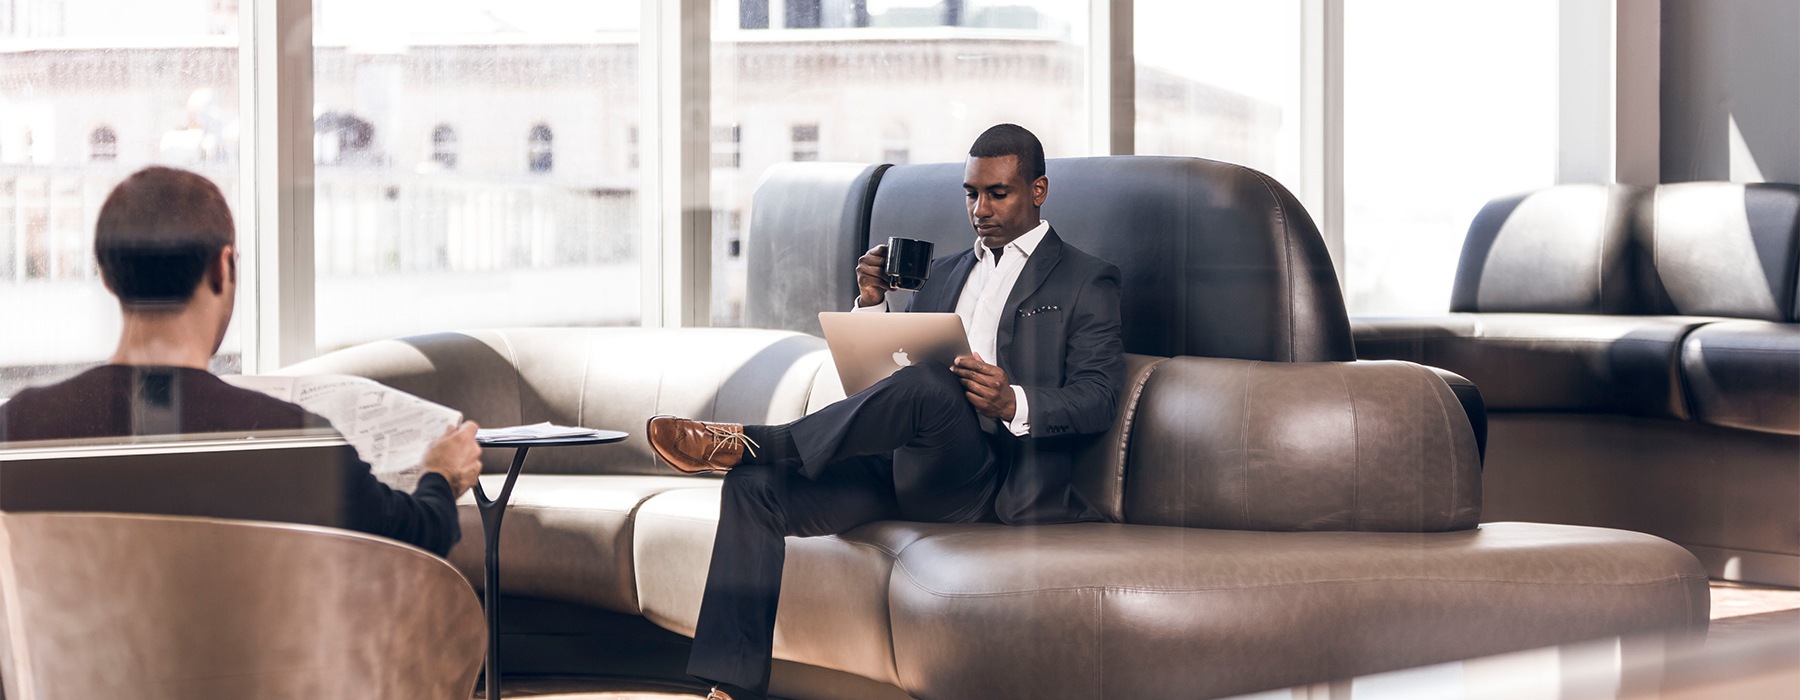 Man sitting on couch with laptop and drinking coffee